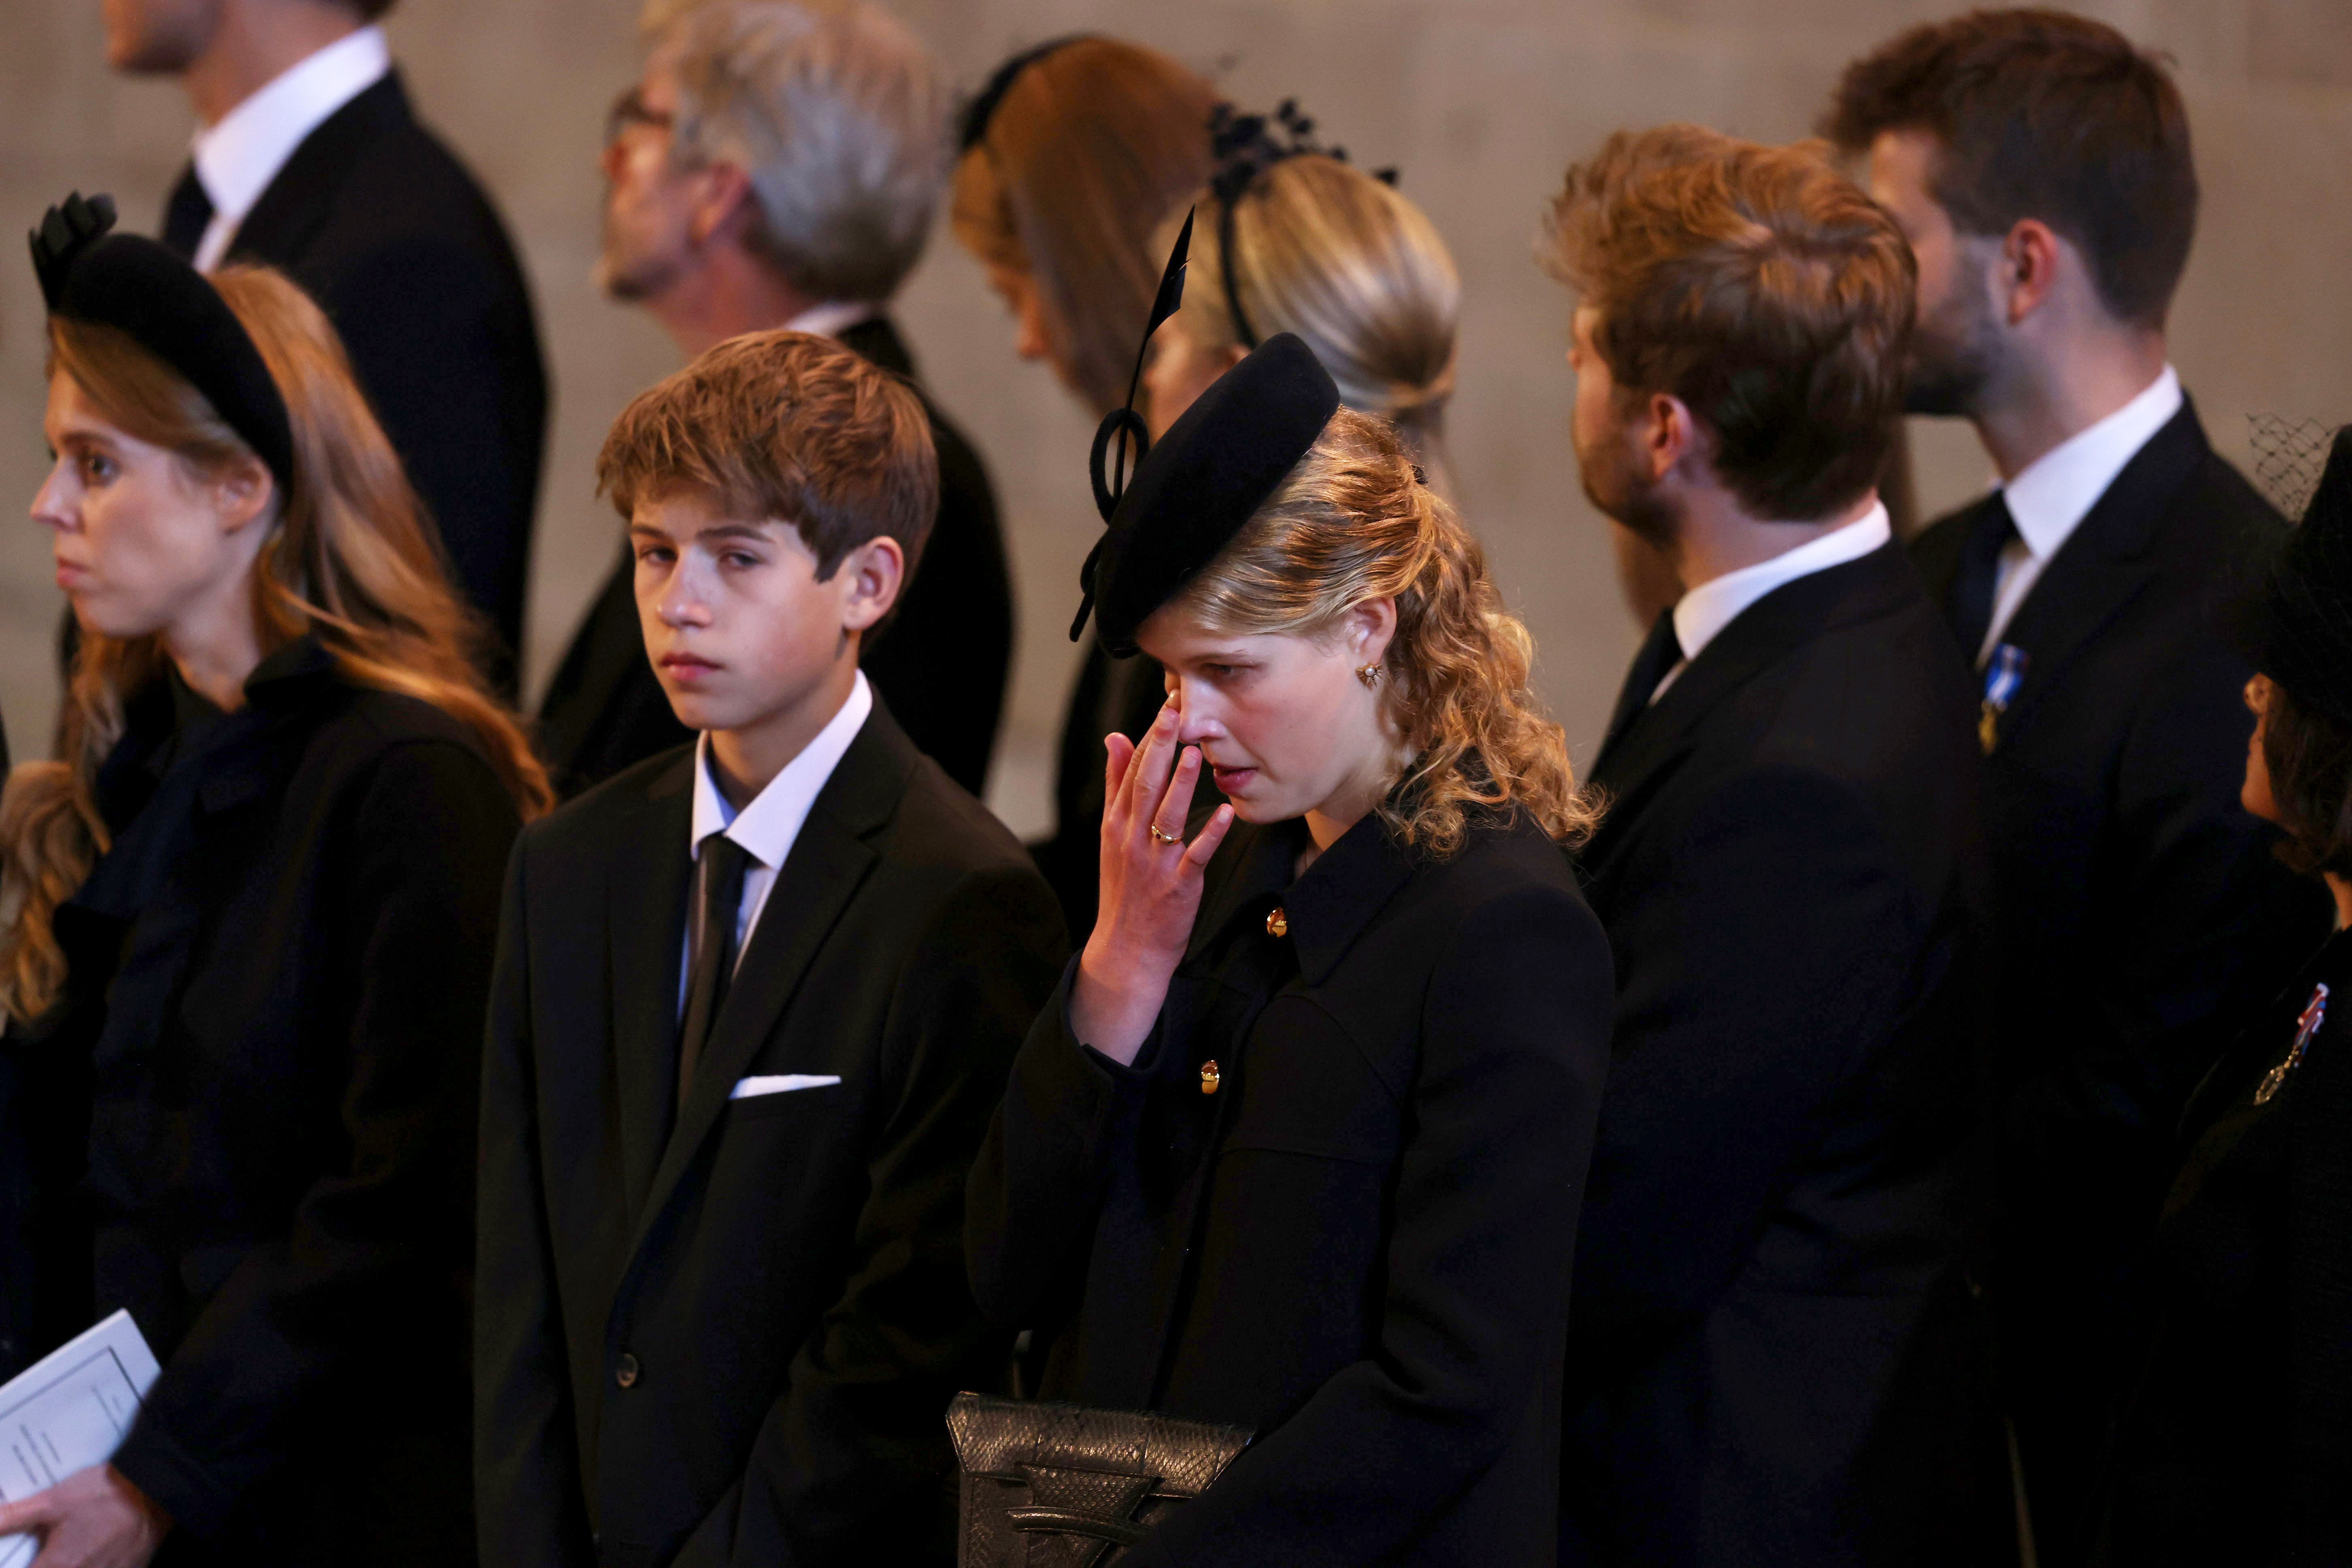 James, Viscount Severn and Lady Louise Windsor pay their respects in The Palace of Westminster during the procession for the Lying-in State of Queen Elizabeth II on September 14, 2022 in London, United Kingdom | Source: Getty Images